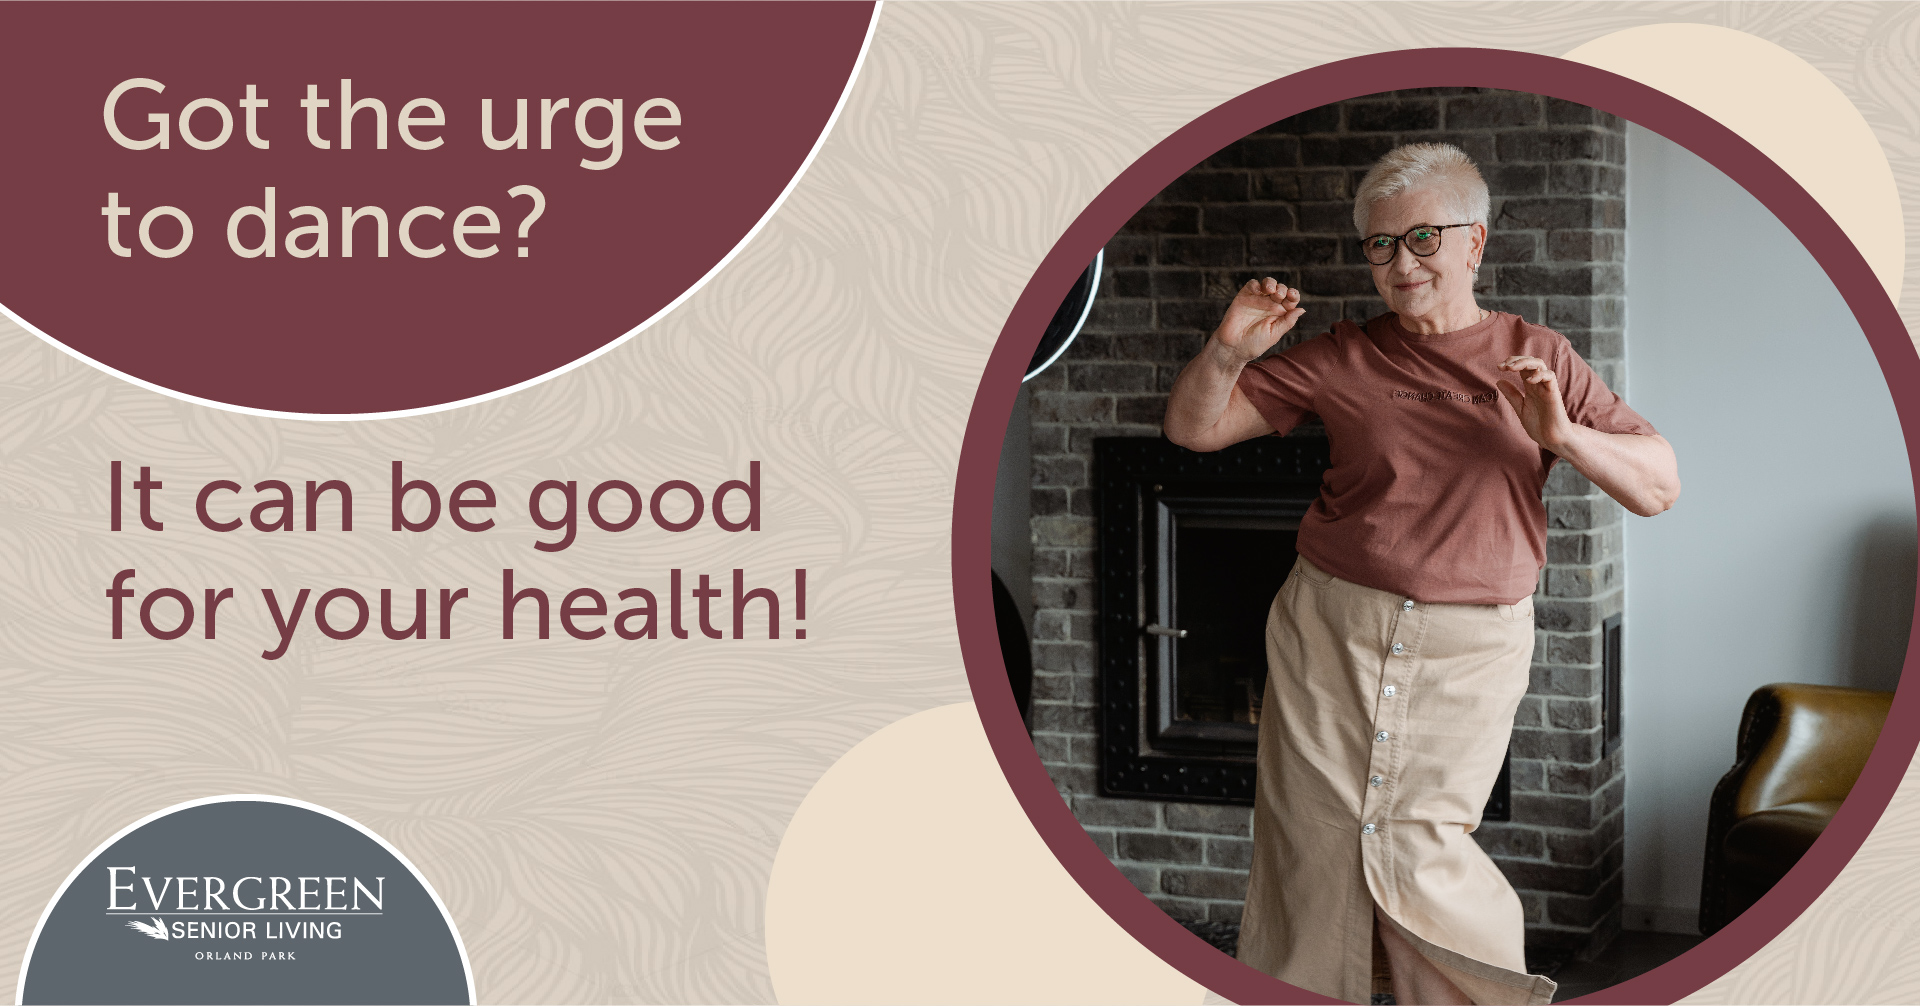 Got the urge to dance? It can be good for your health!